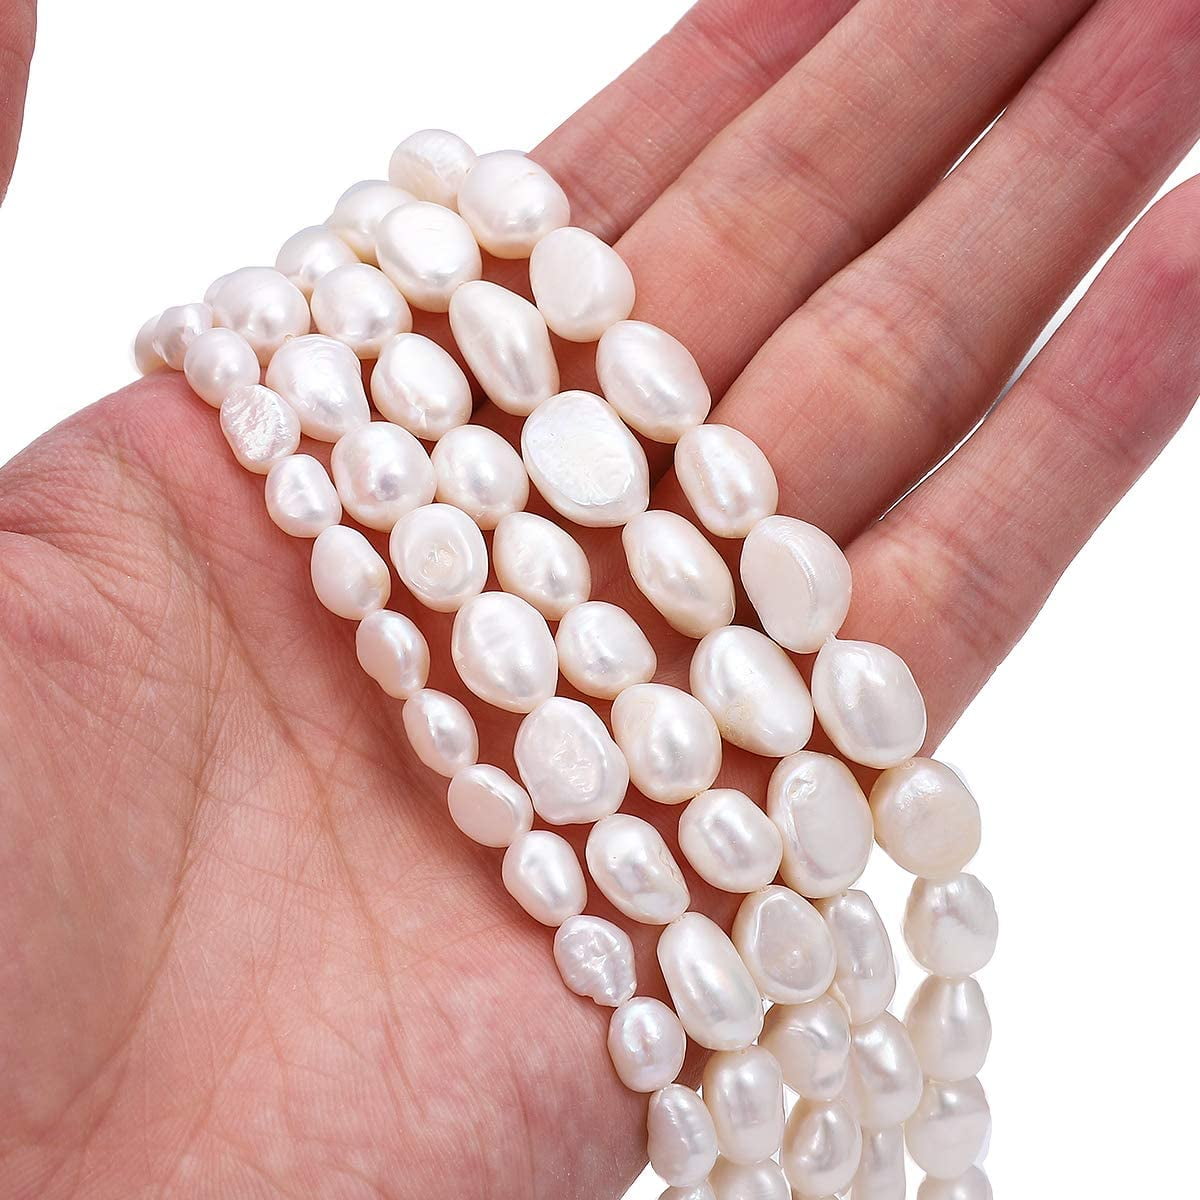 BEADIA Natural Pearl Beads 9-10mm White Freshwater Cultured Loose Gemstone  Beads for DIY Jewelry Making 13.8''/Strand 